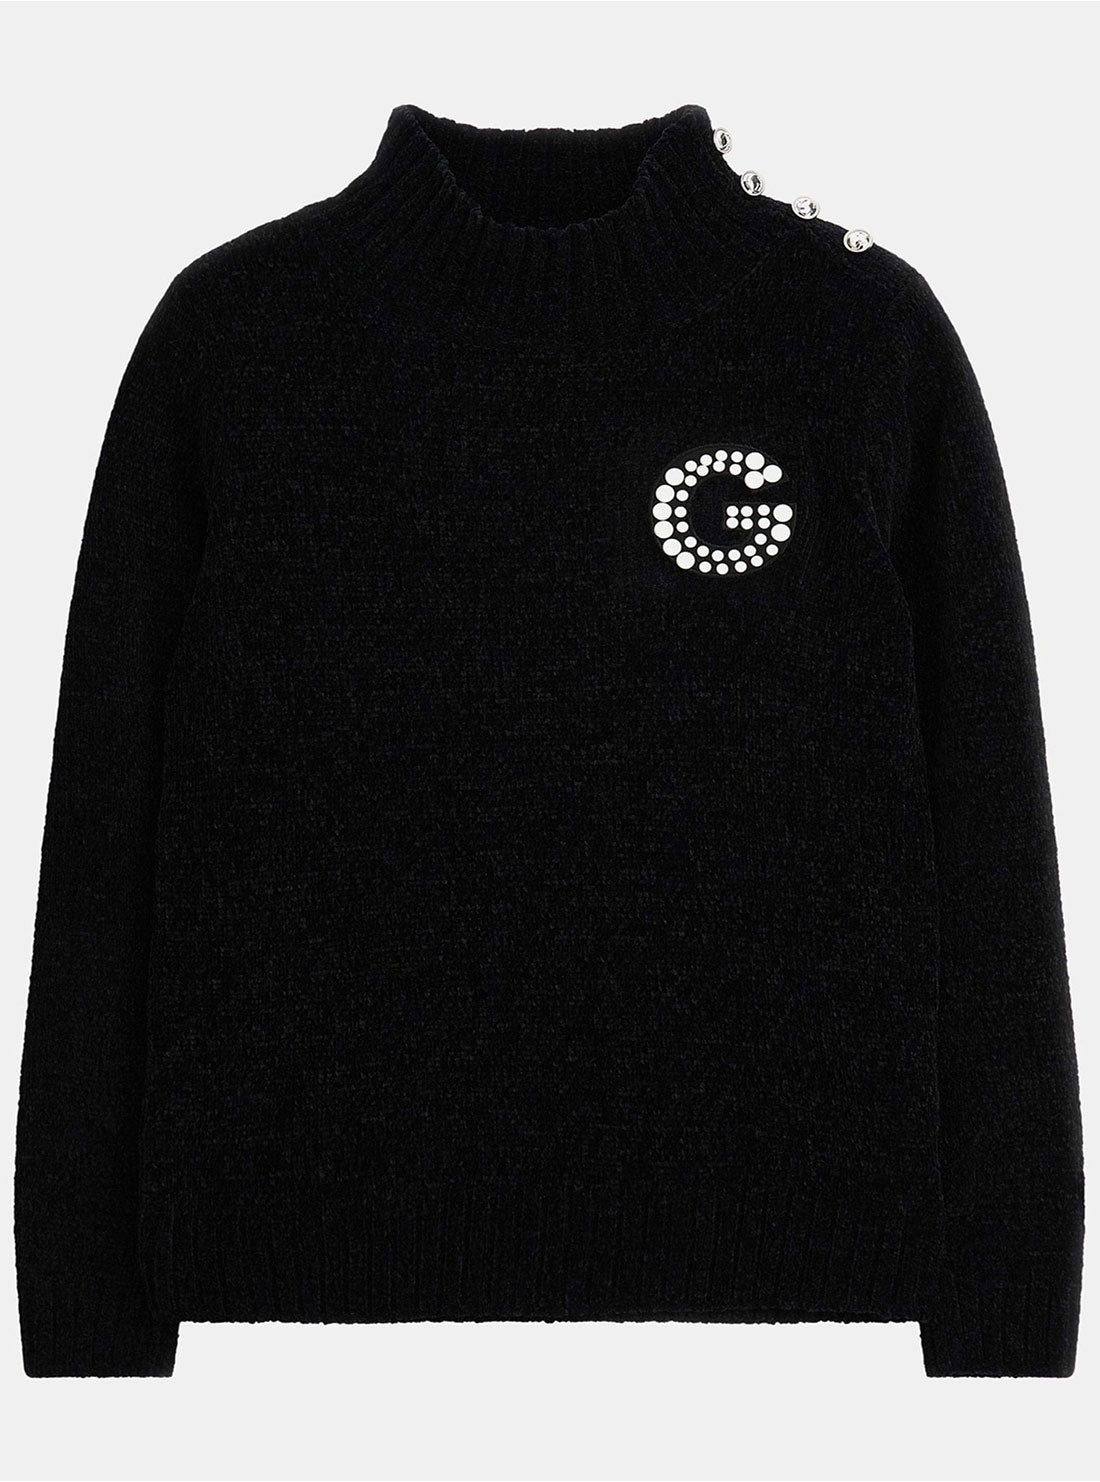 GUESS Black Long Sleeve Jumper (7-16) front view